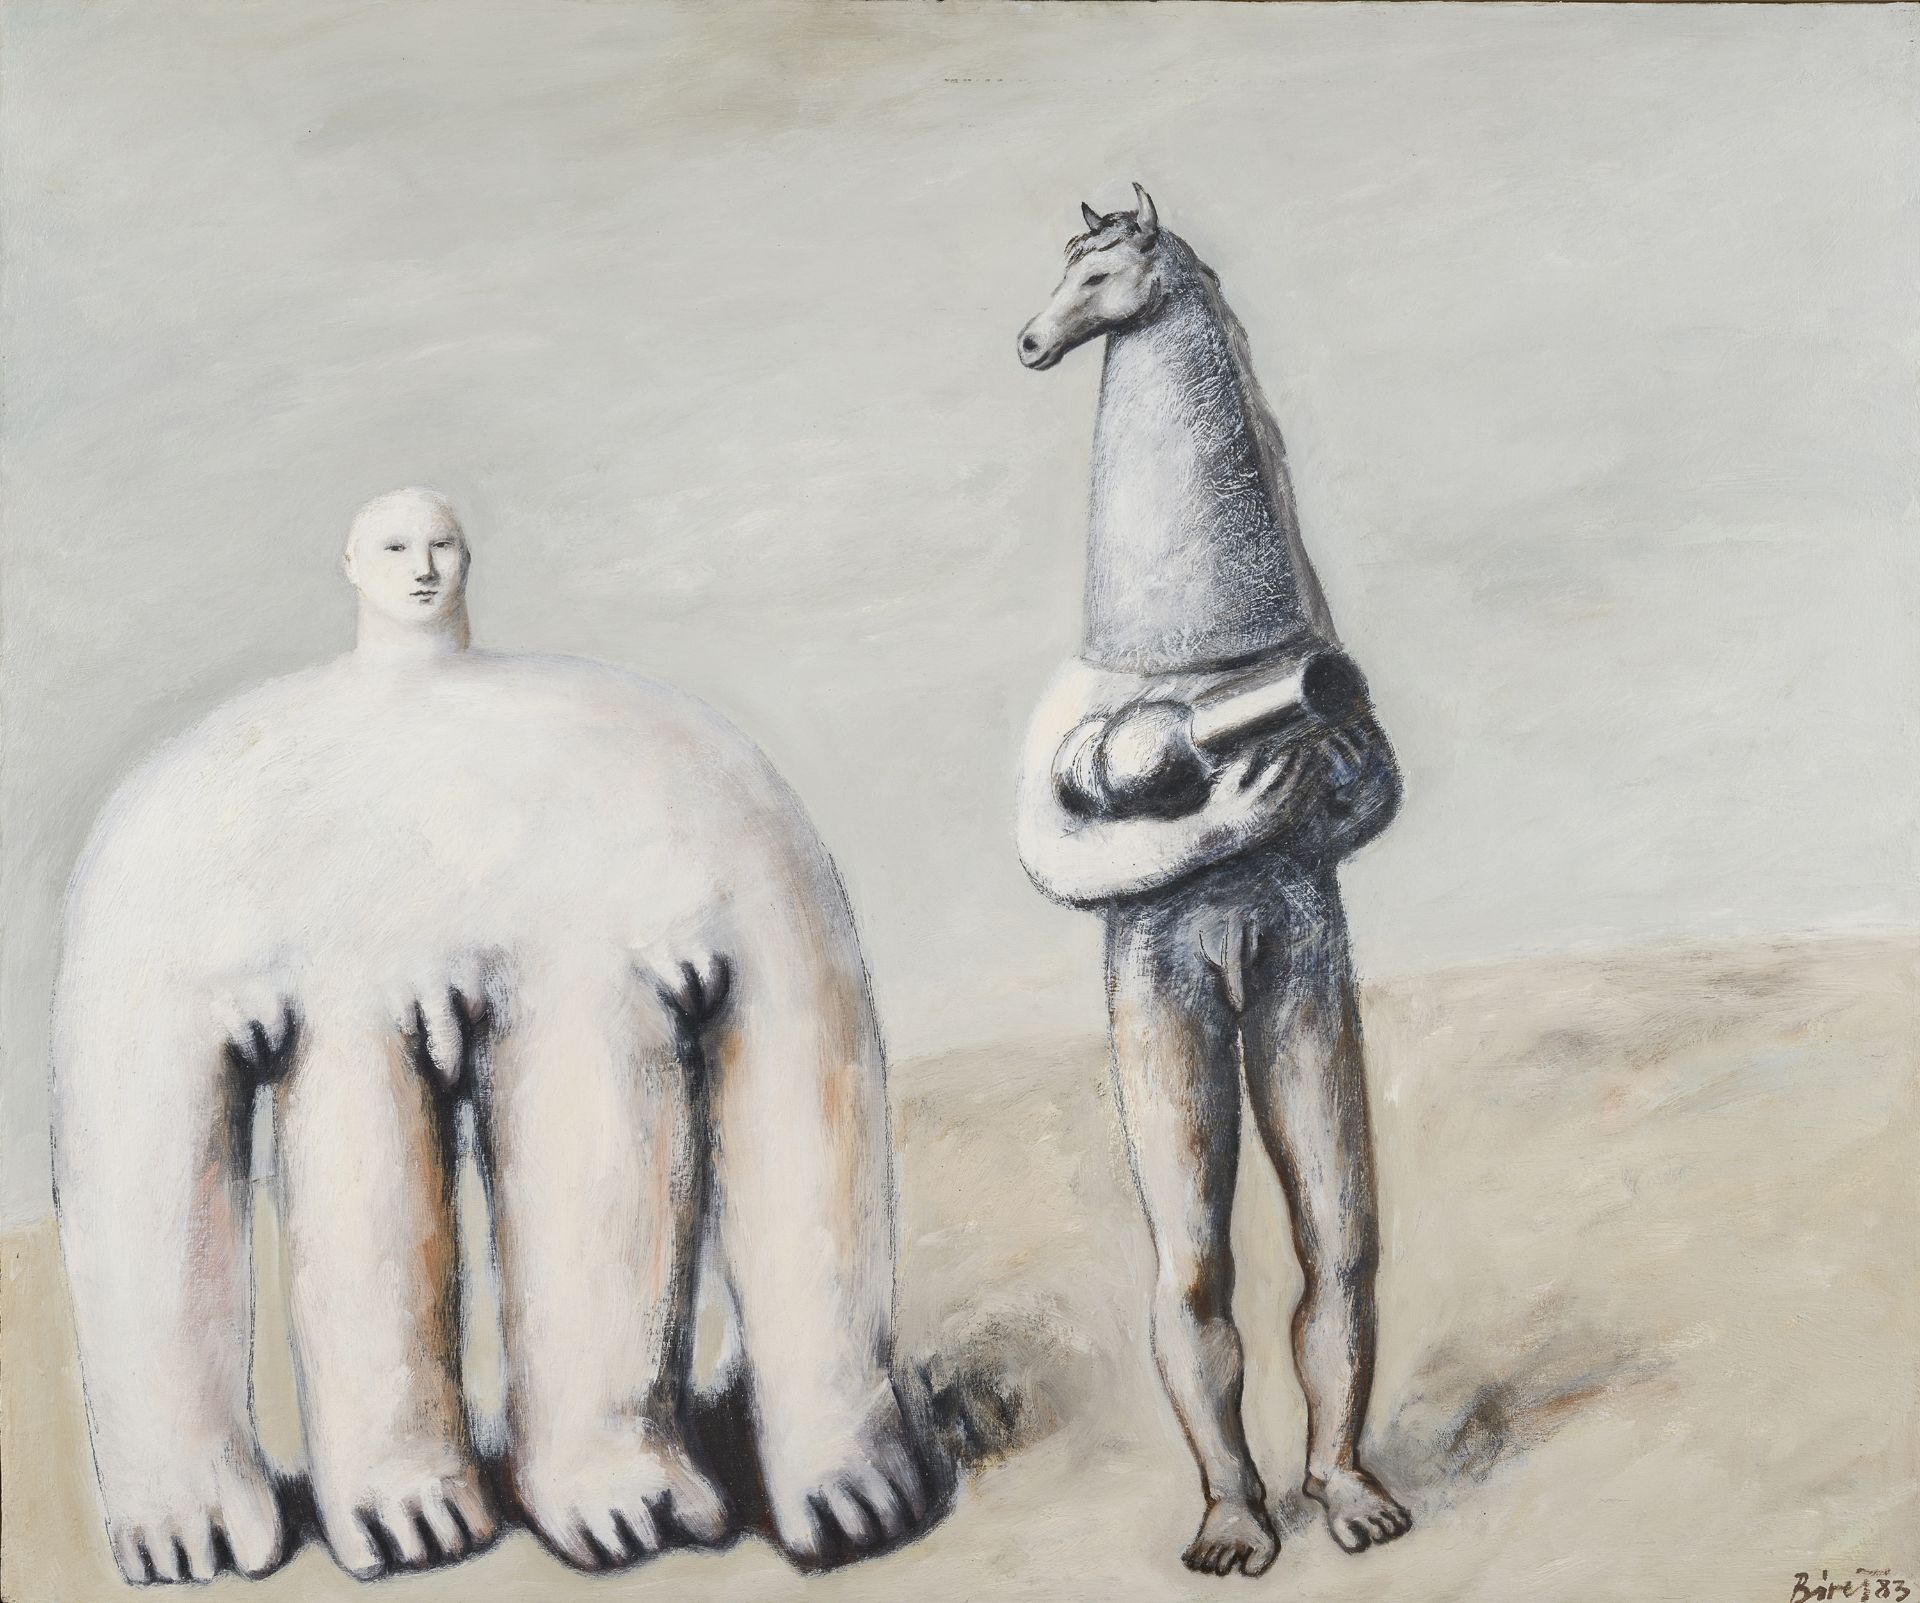 OIL PAINTING OF SURREAL CHARACTERS BY TIHOMIR BIRES 1983